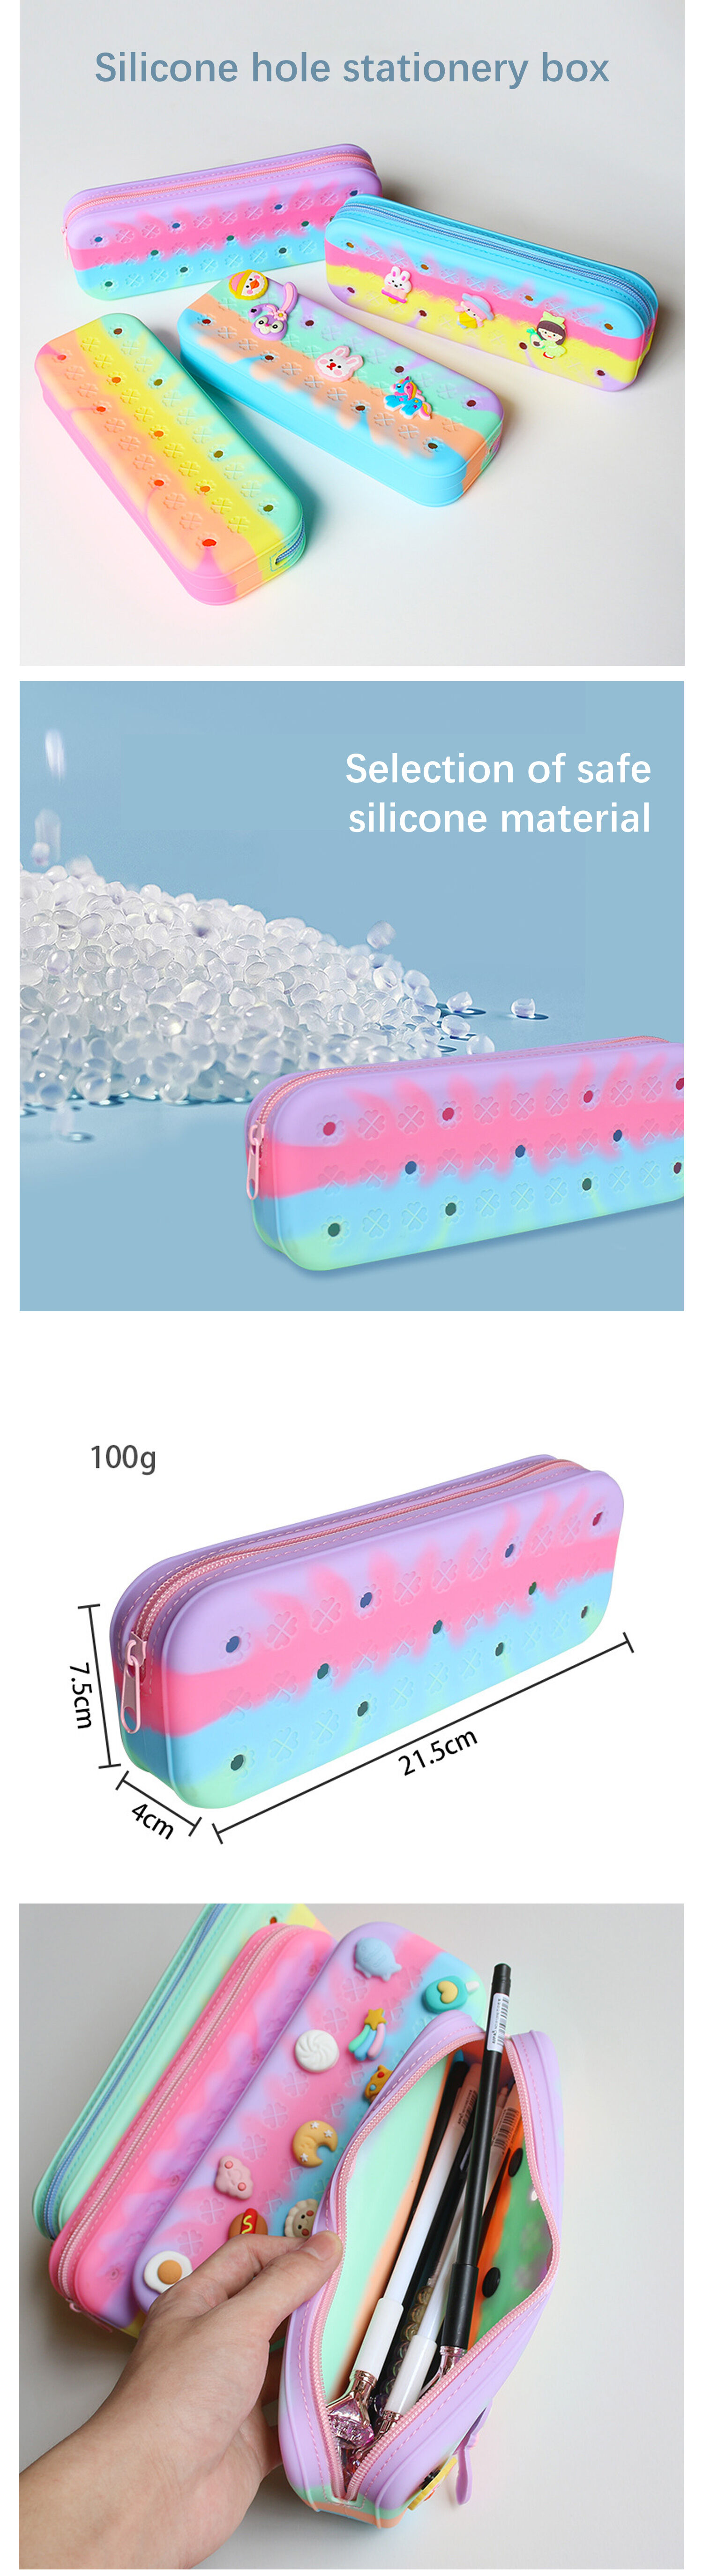 Buy Wholesale China Cute Pencil Case For Kids Silicone Hole Diy